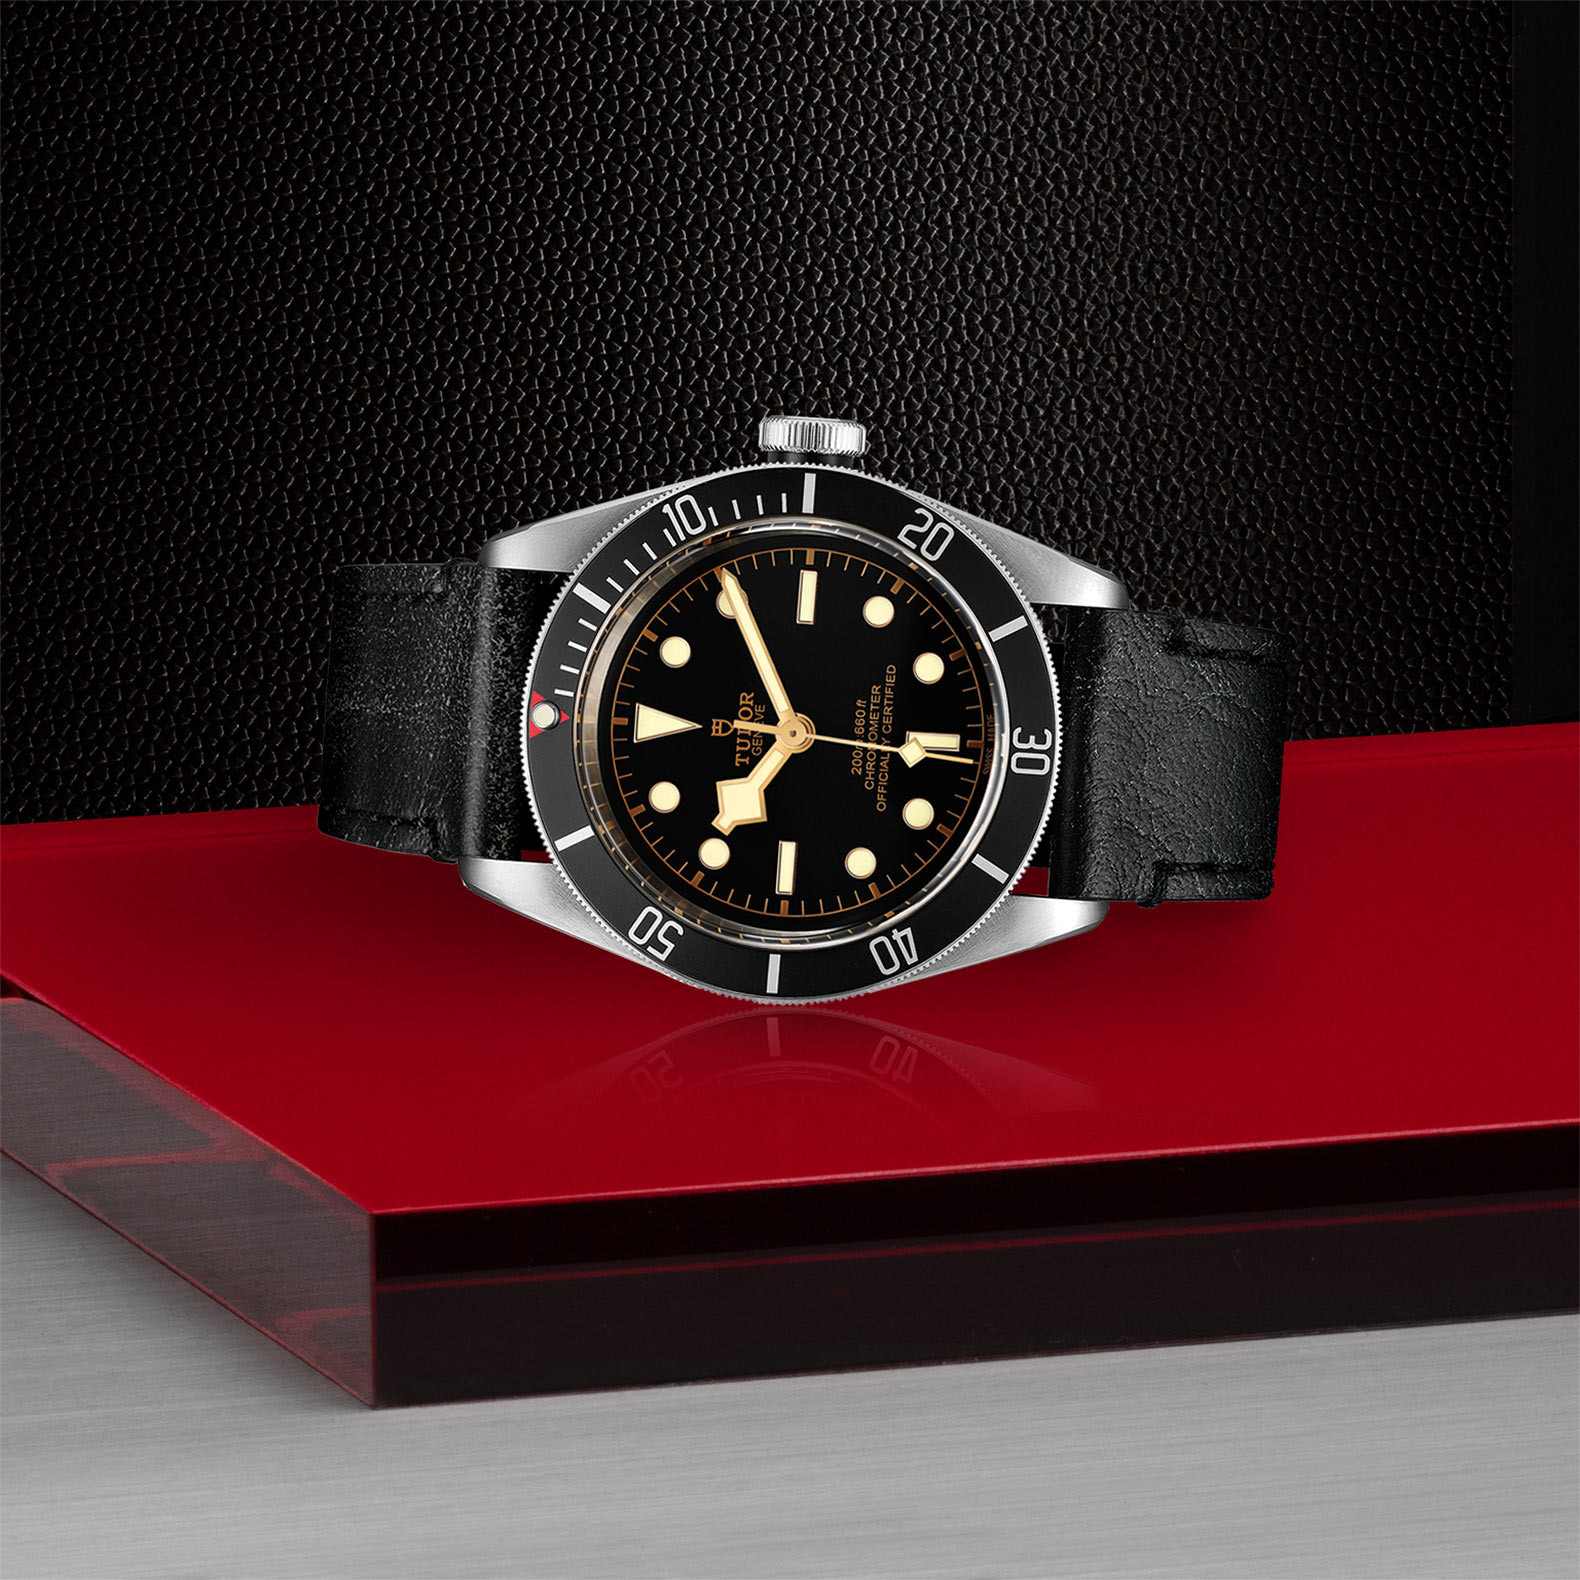 TUDOR Black Bay Watch in Store Laying Down